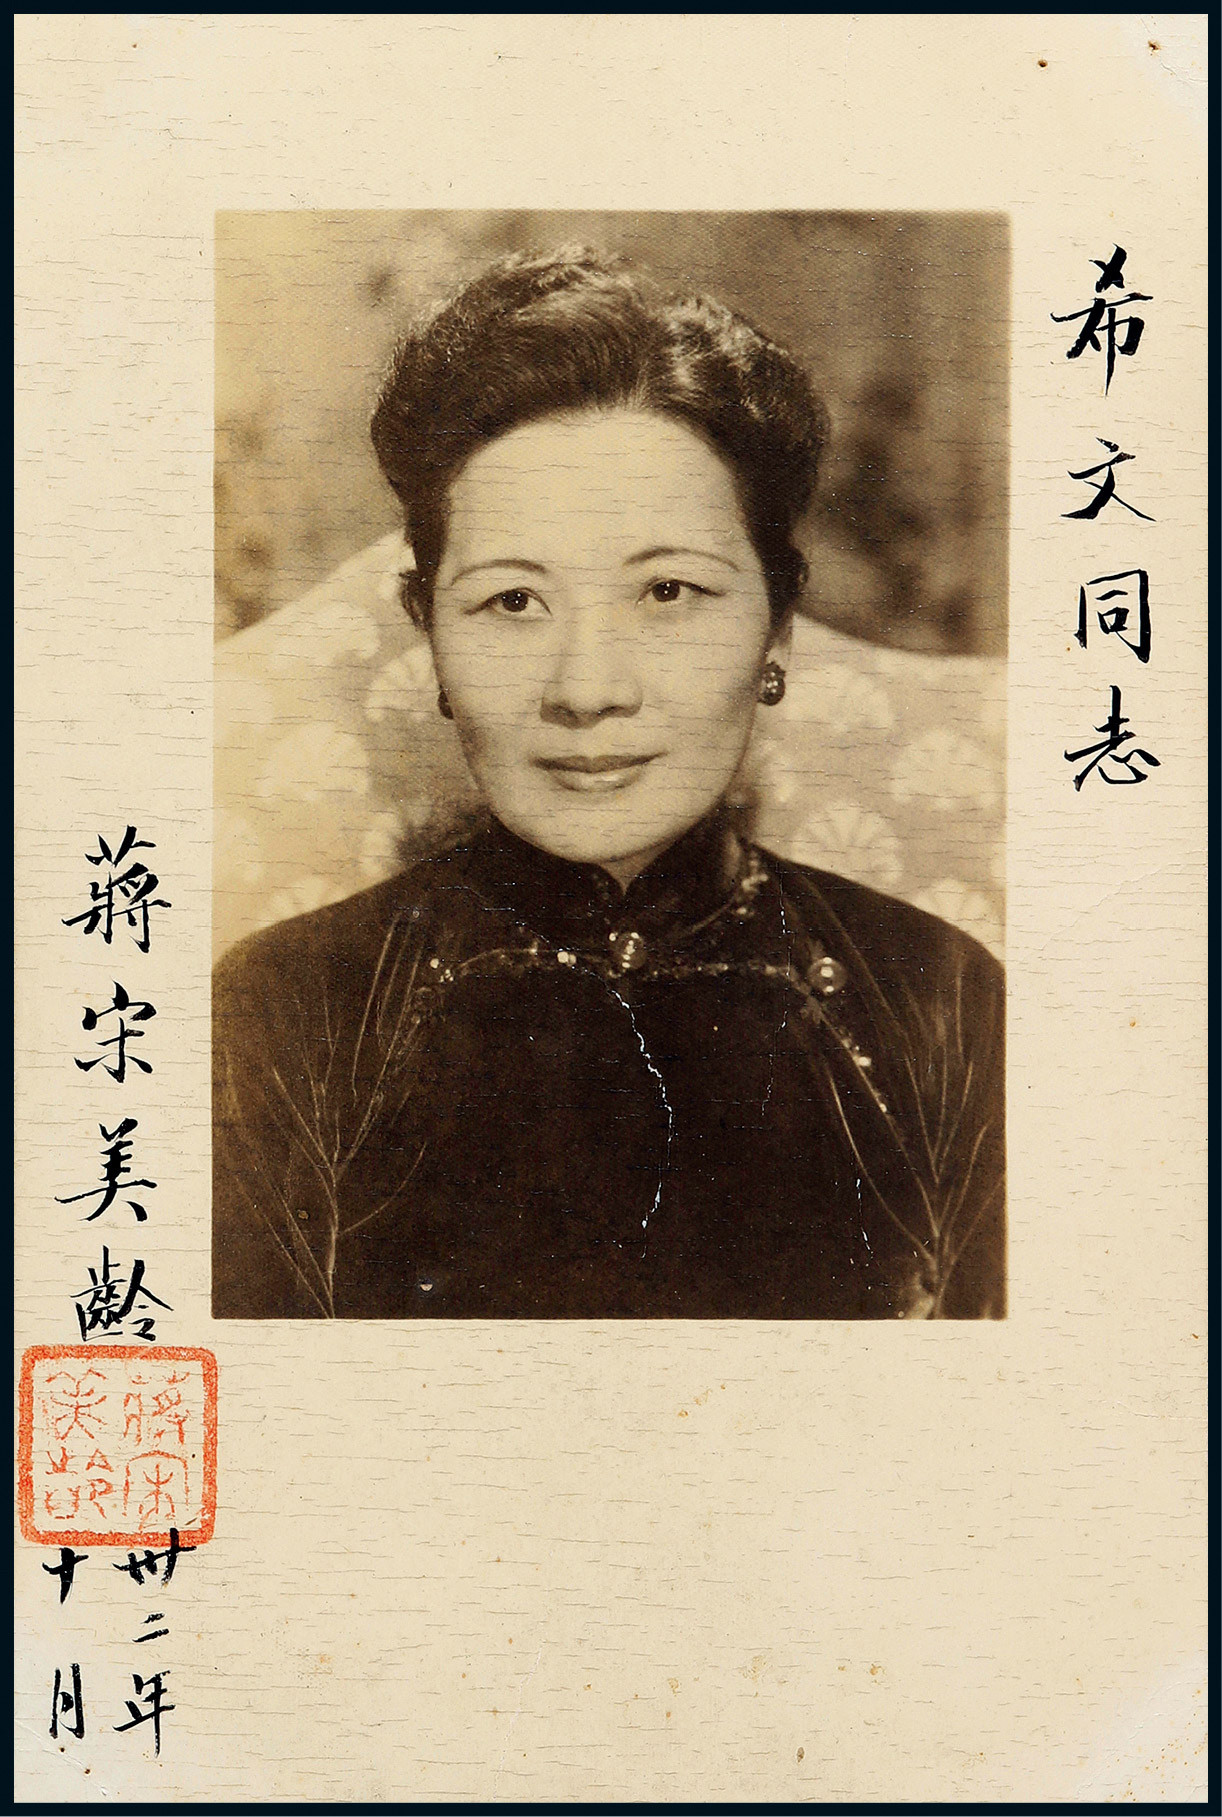 The portrait with inscription and signature of Song Meiling